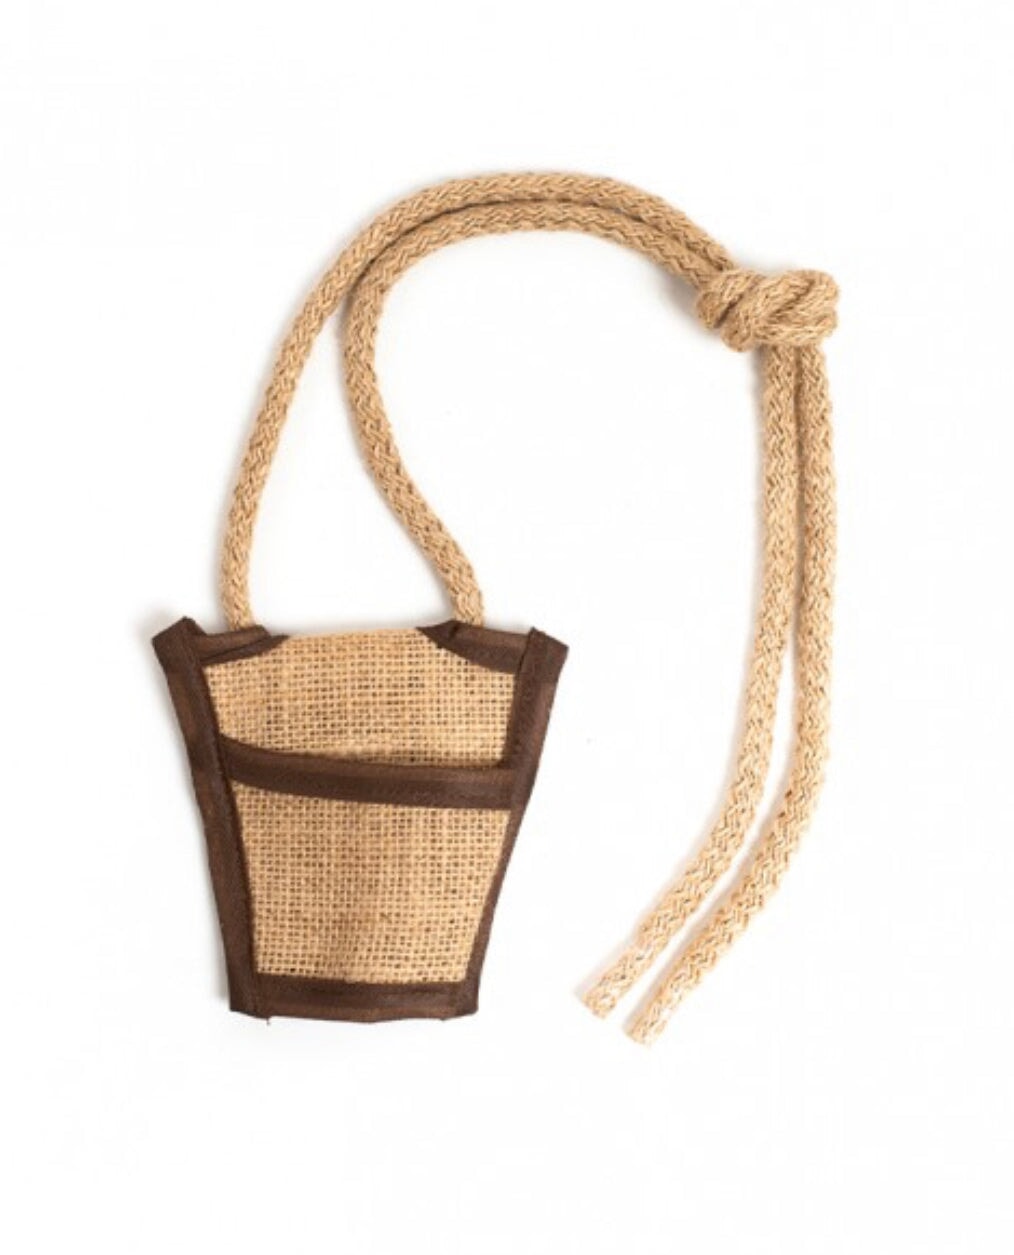 Slingshot girdle, jute, Handcrafted by Kalid Medieval Classic Toy - Alder & Alouette